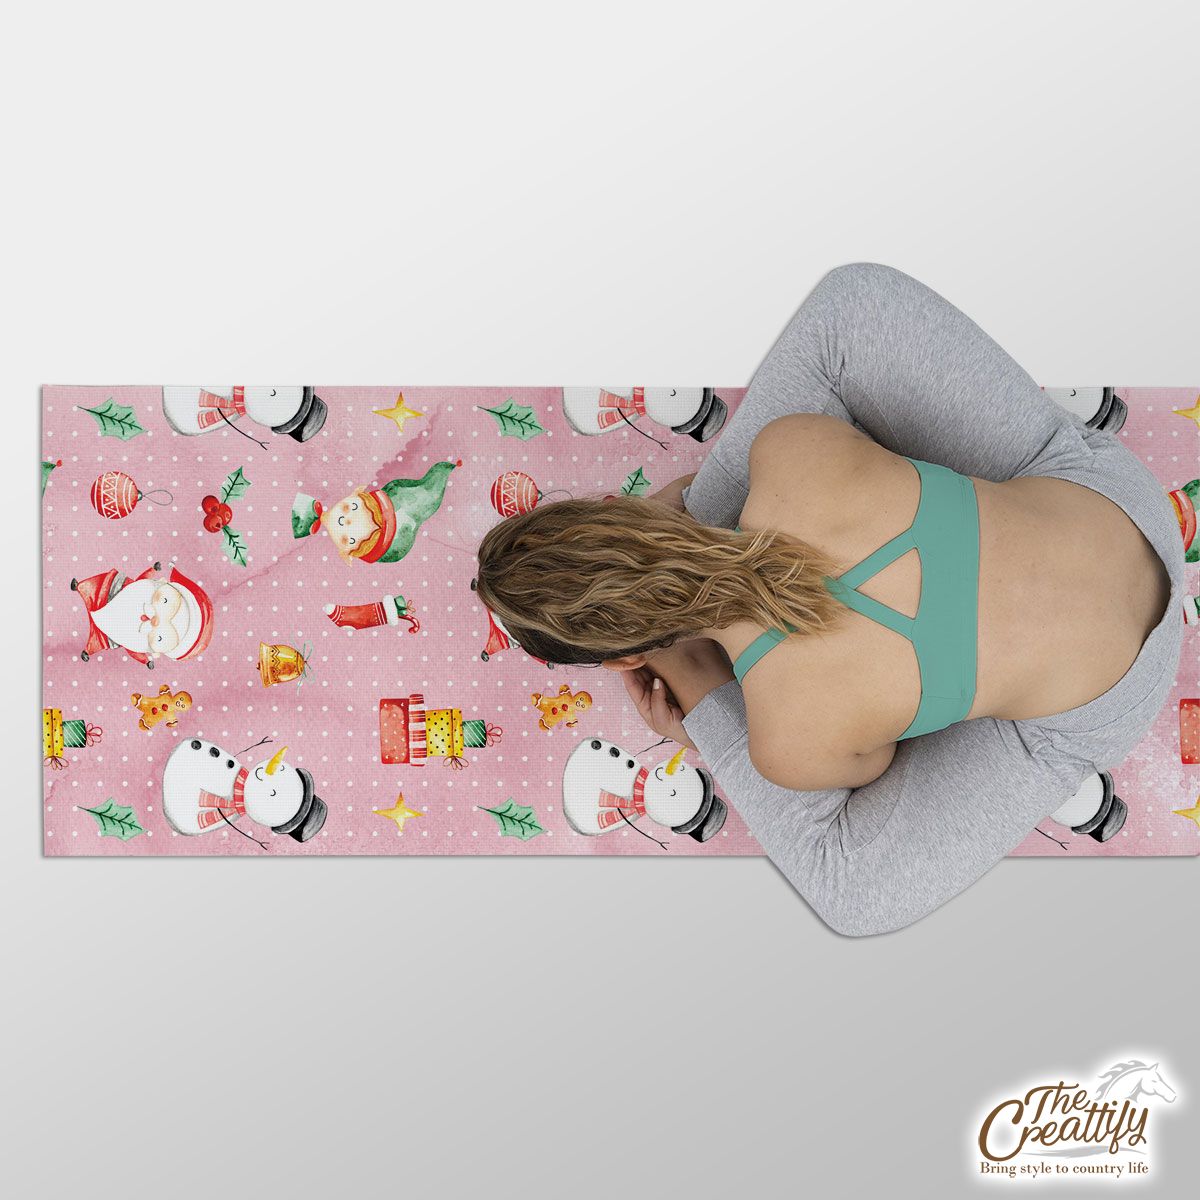 Santa Clause, Snowman And Christmas Elf With Christmas Gifts Yoga Mat